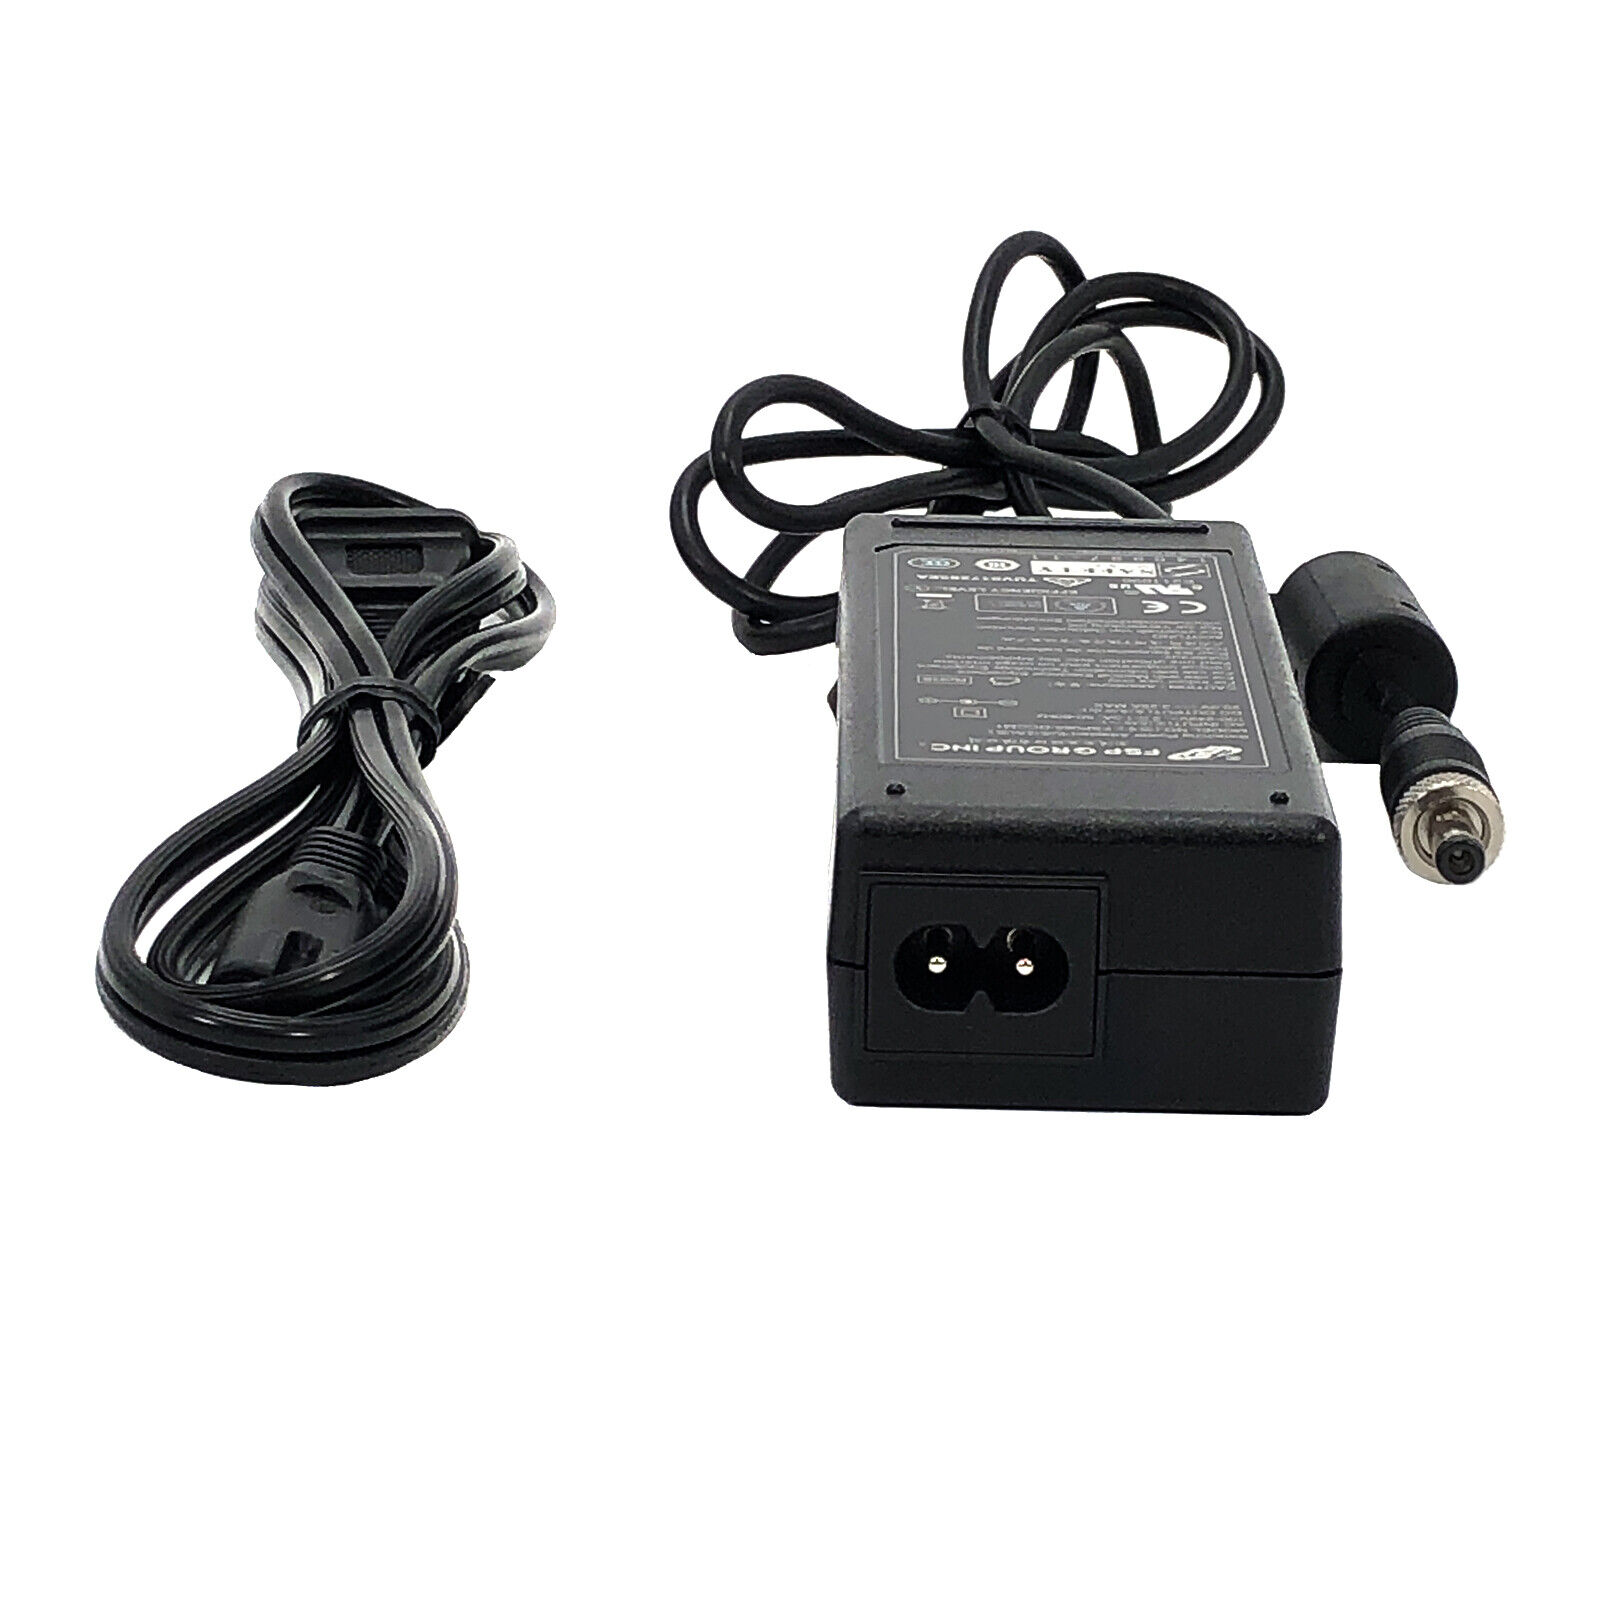 *Brand NEW*Original FSP FSP065M-DCAC 20V 3.25A 65W AC Switching Power Adapter POWER Supply